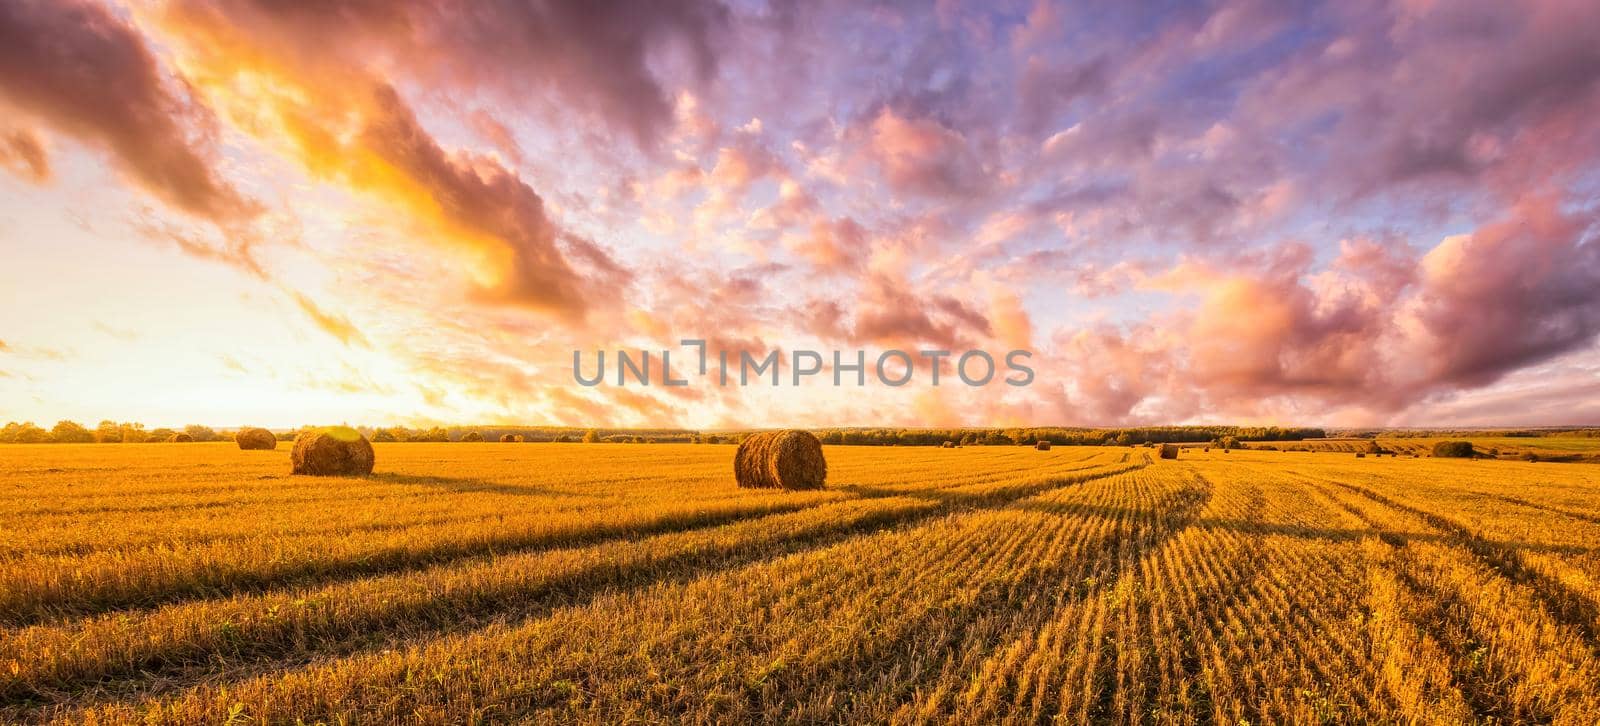 Sunset on the field with haystacks in Autumn season. Rural landscape with cloudy sky background in a sunny evening. Golden harvest of wheat.